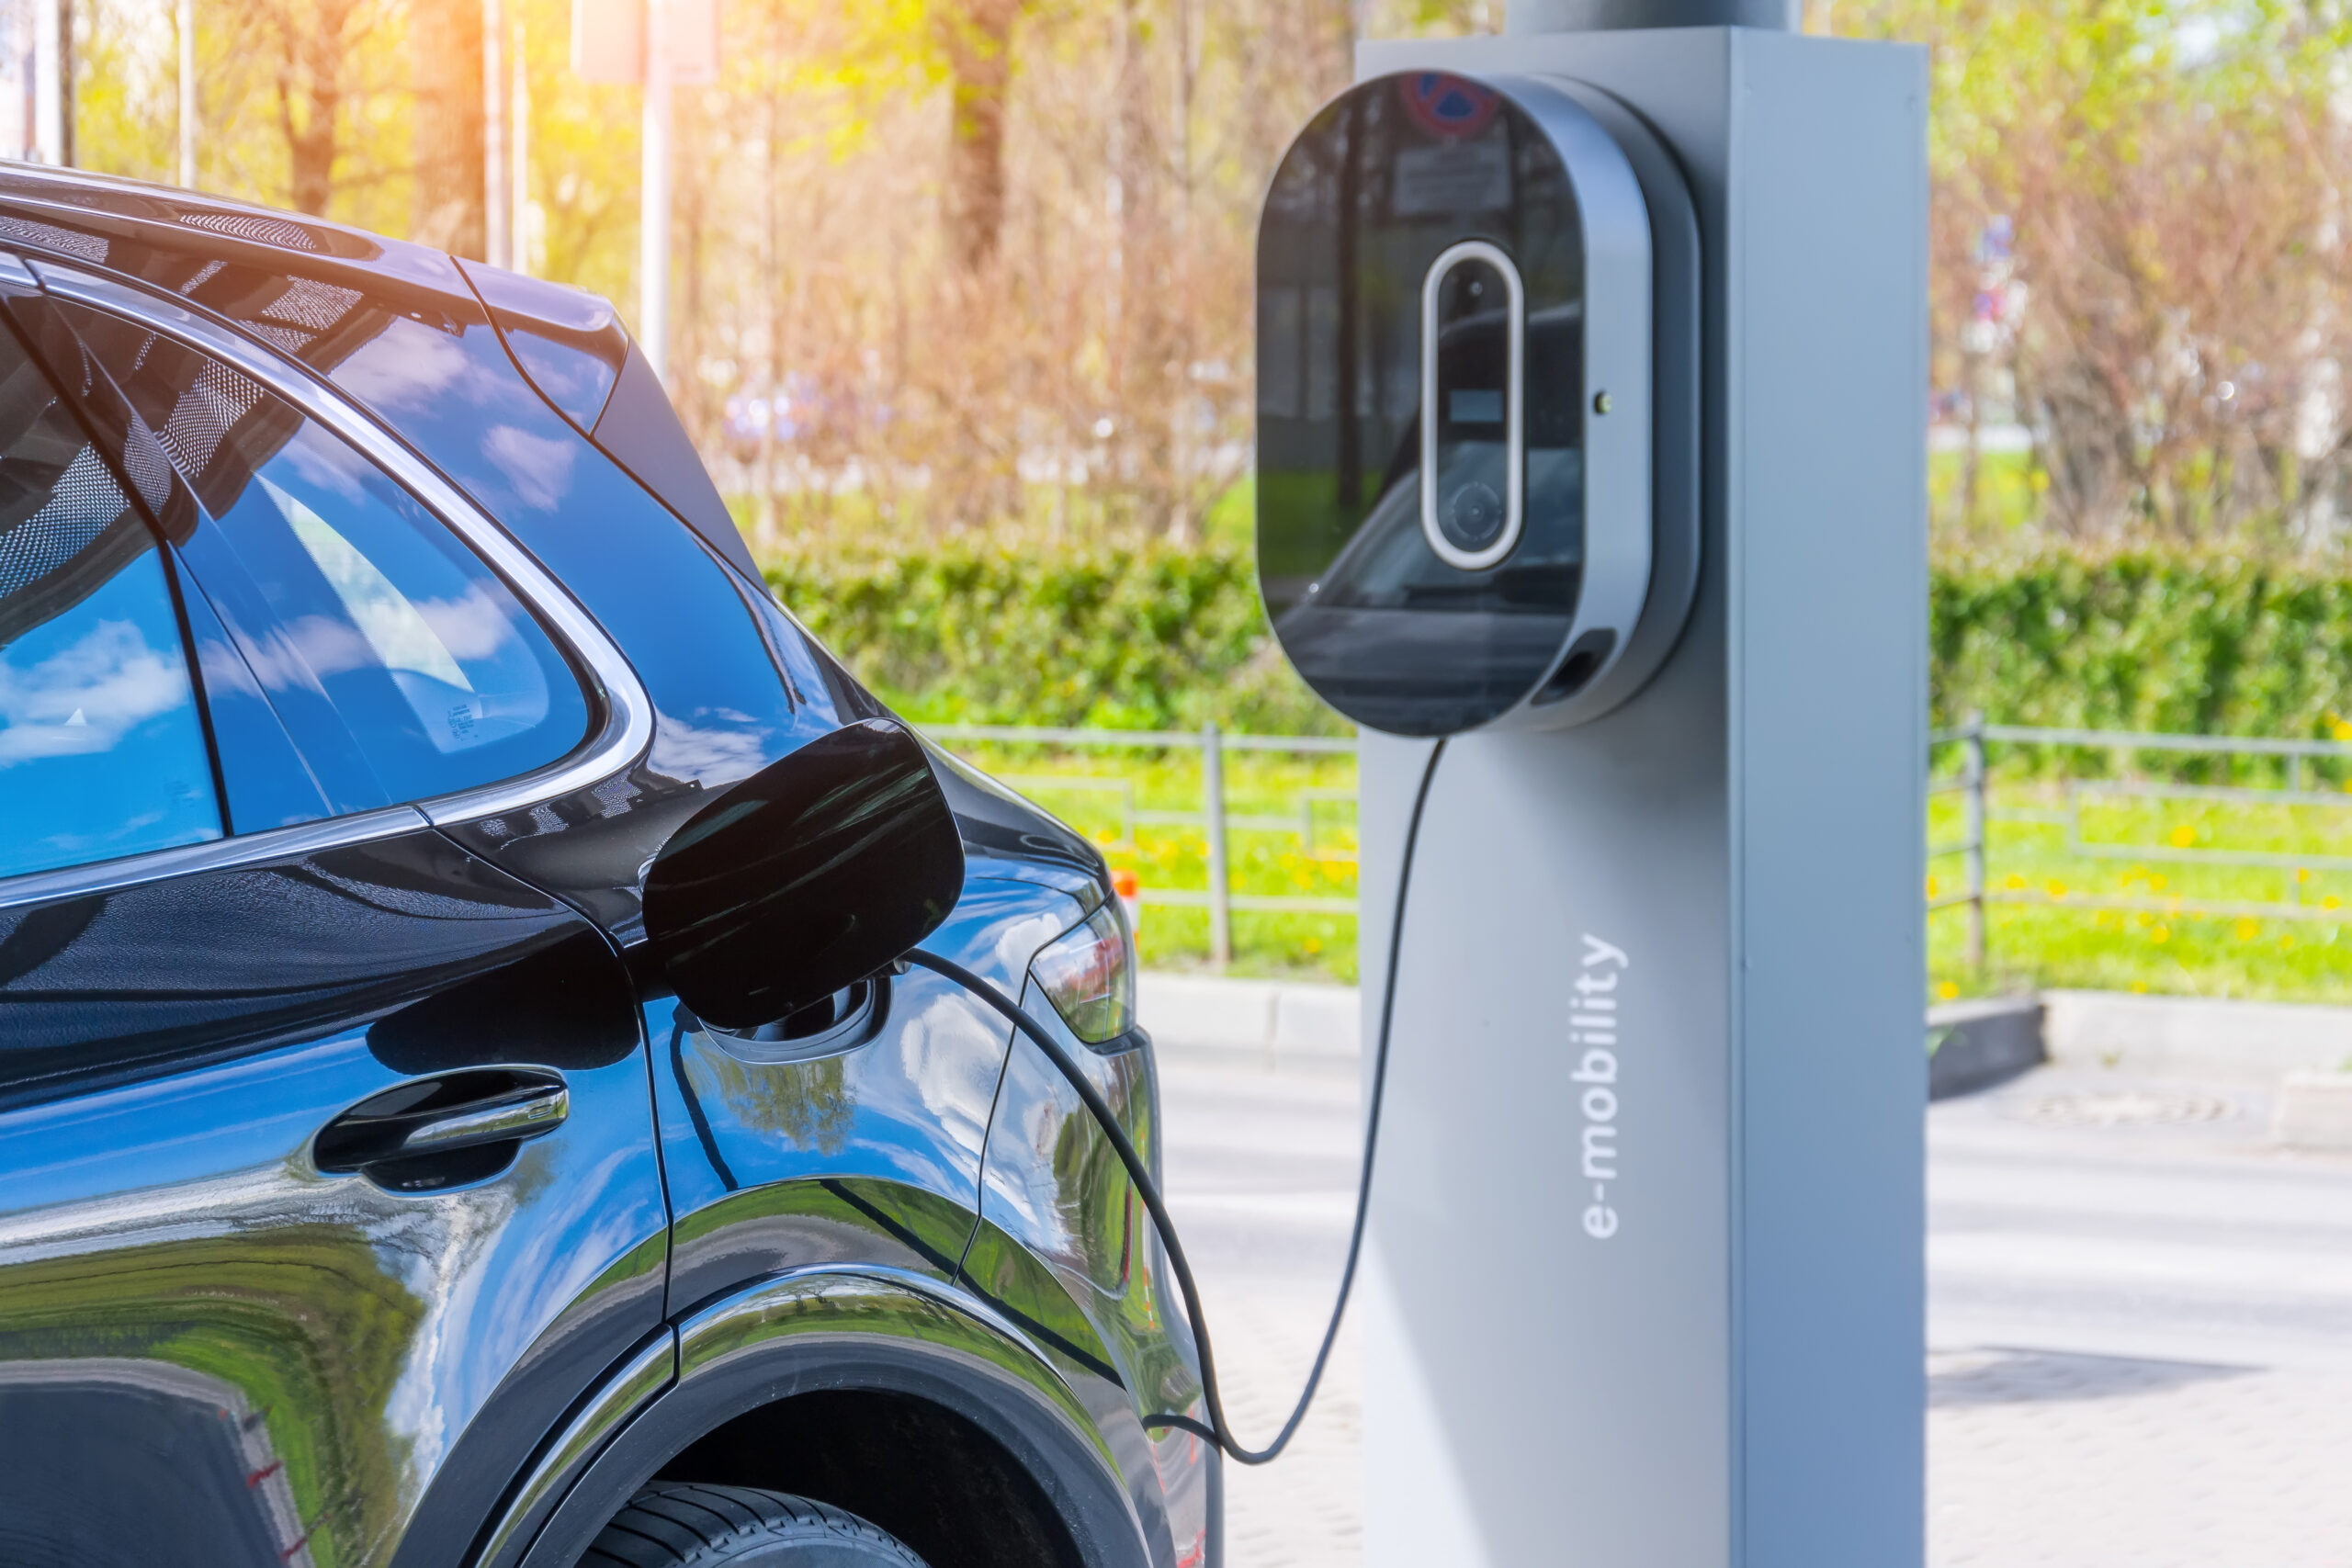 Picture of an e-mobility electric vehicle charger